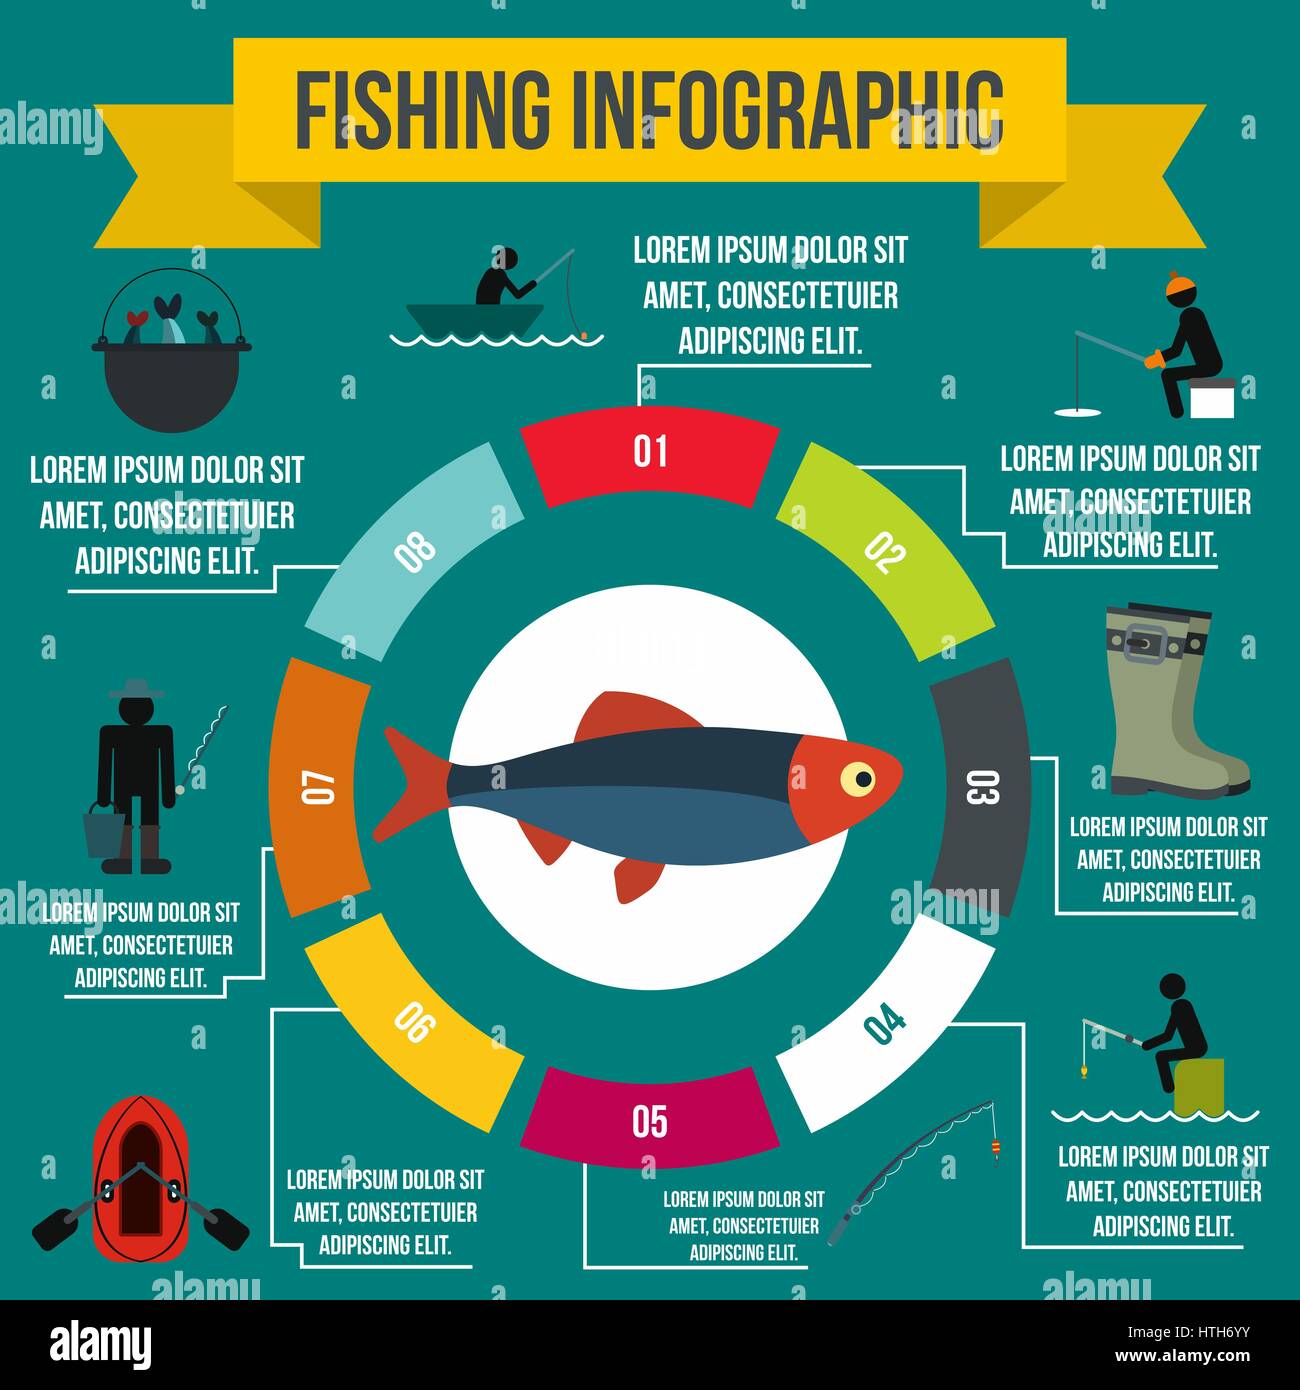 Fishing infographic elements, flat style Stock Vector